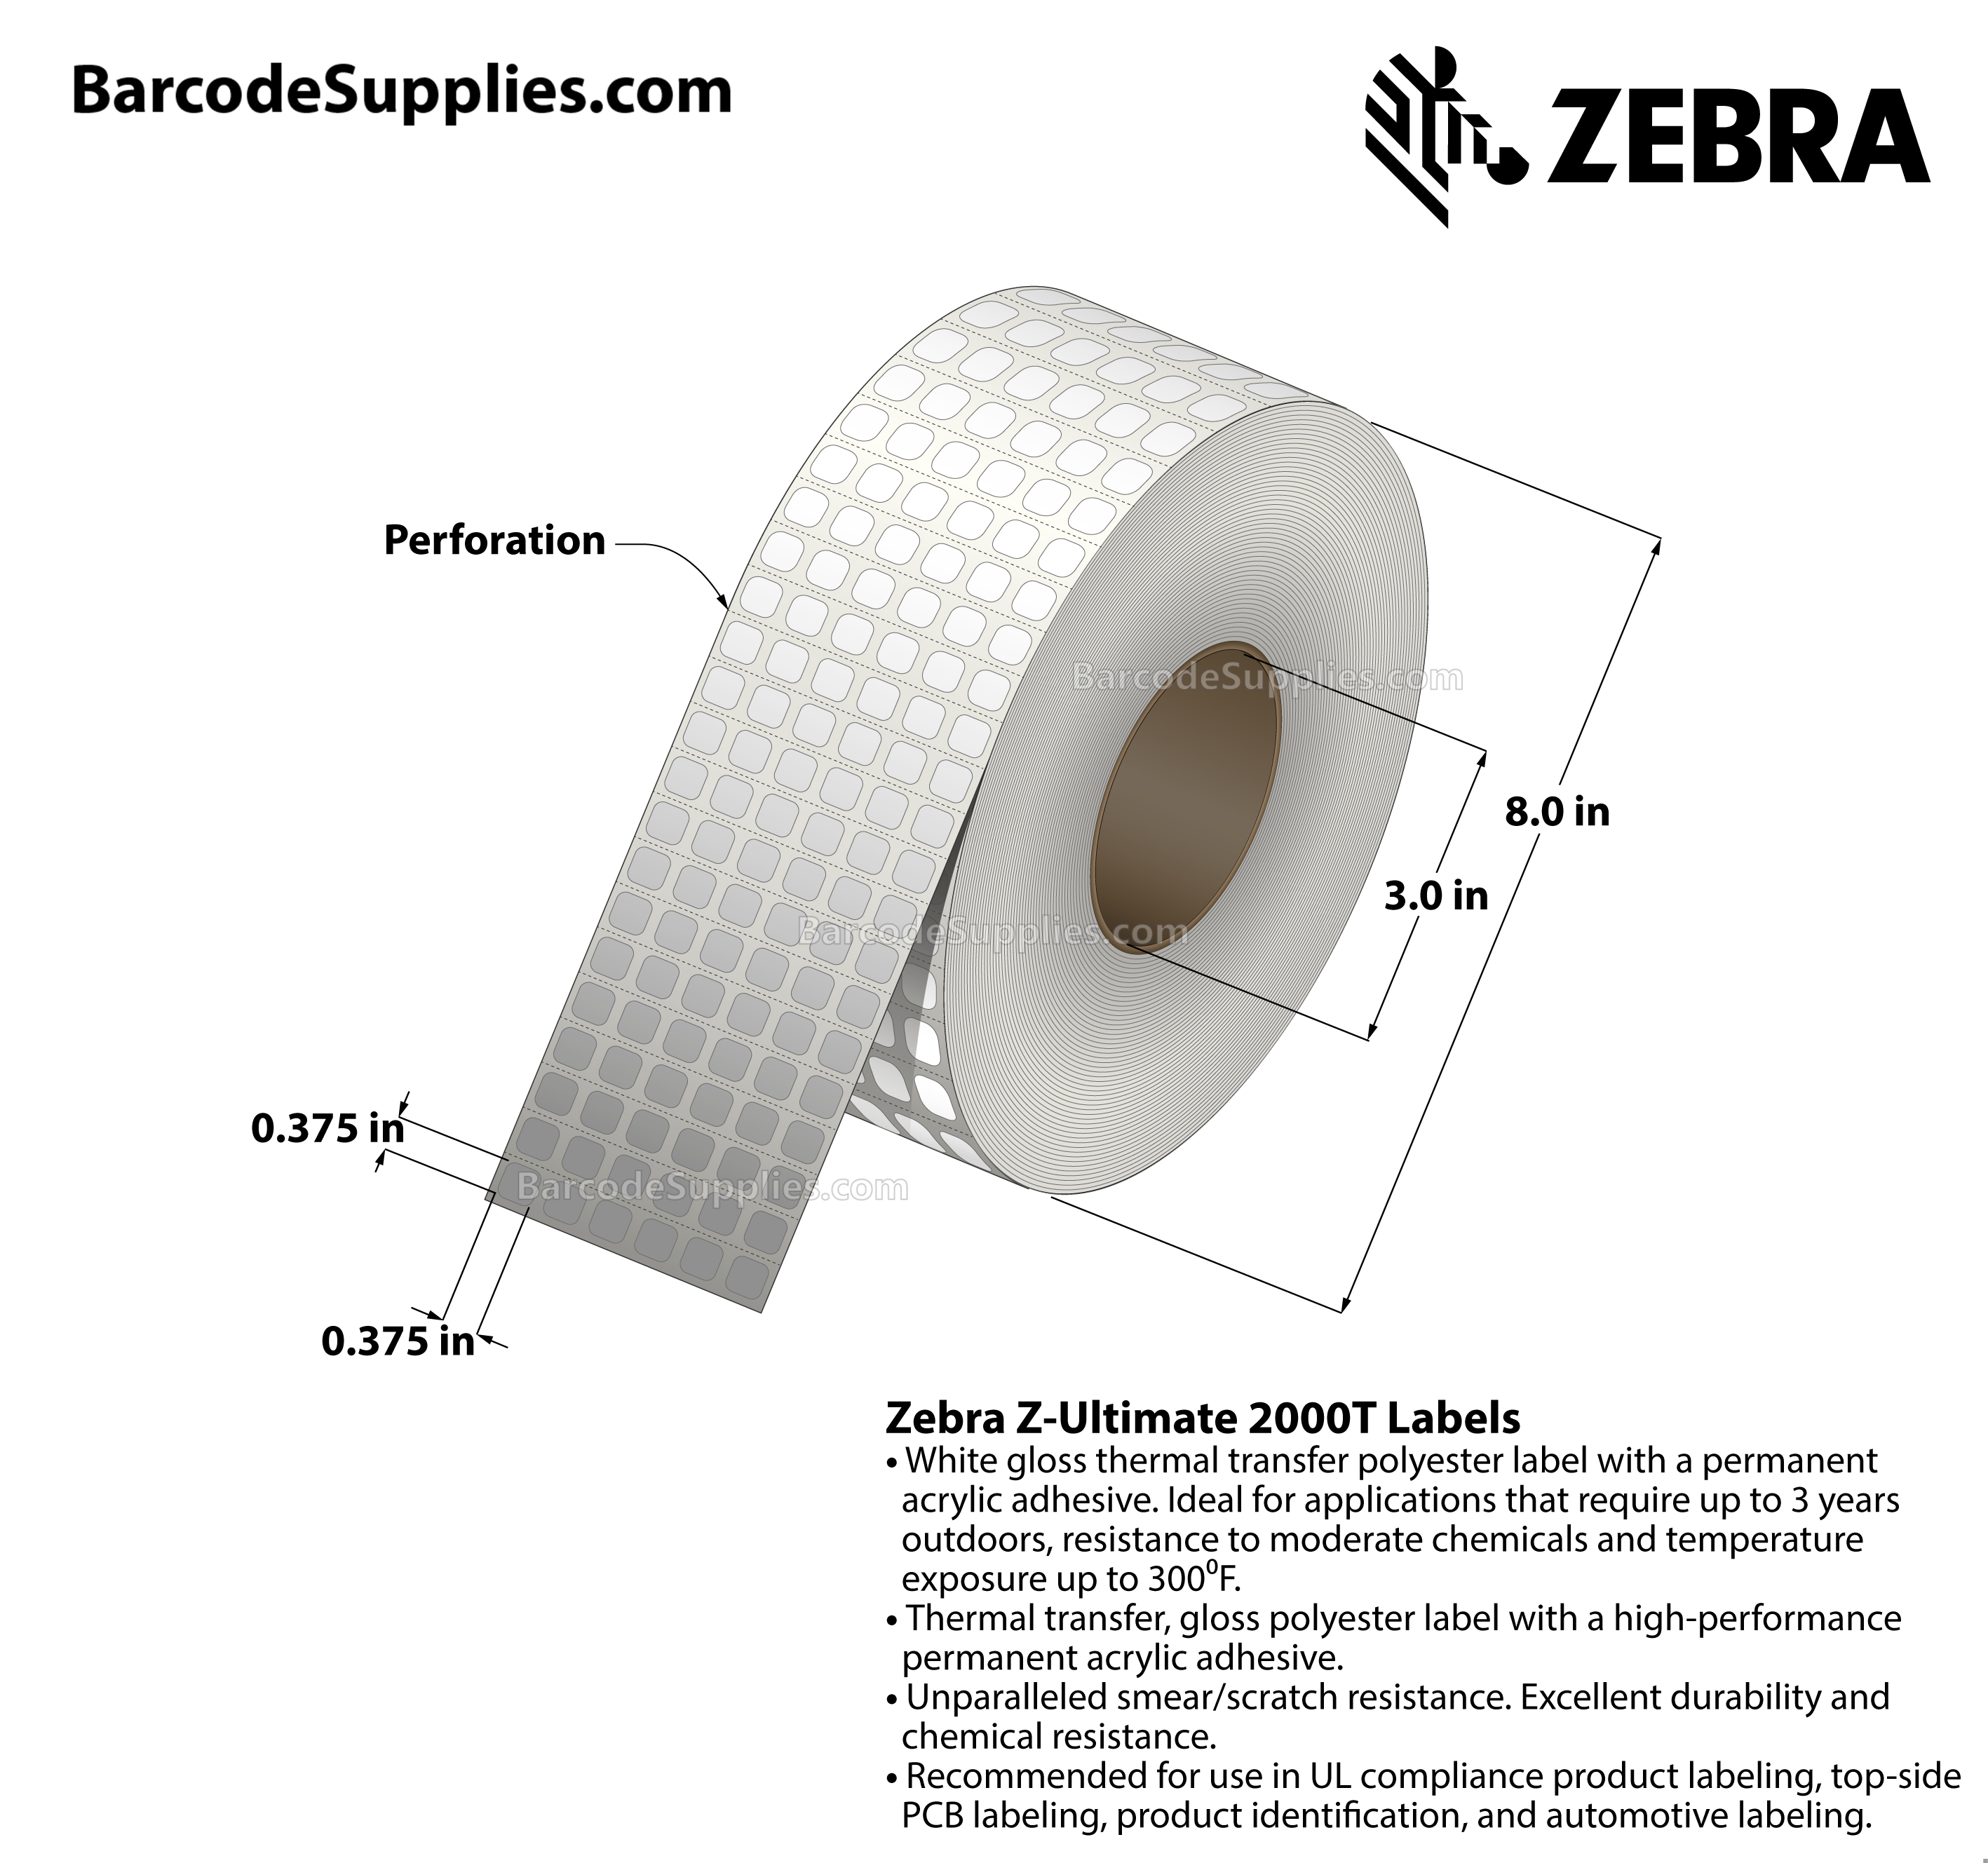 0.375 x 0.375 Thermal Transfer White Z-Ultimate 2000T (6-Across) Labels With Permanent Adhesive - Perforated - 11964 Labels Per Roll - Carton Of 4 Rolls - 47856 Labels Total - MPN: 10011968